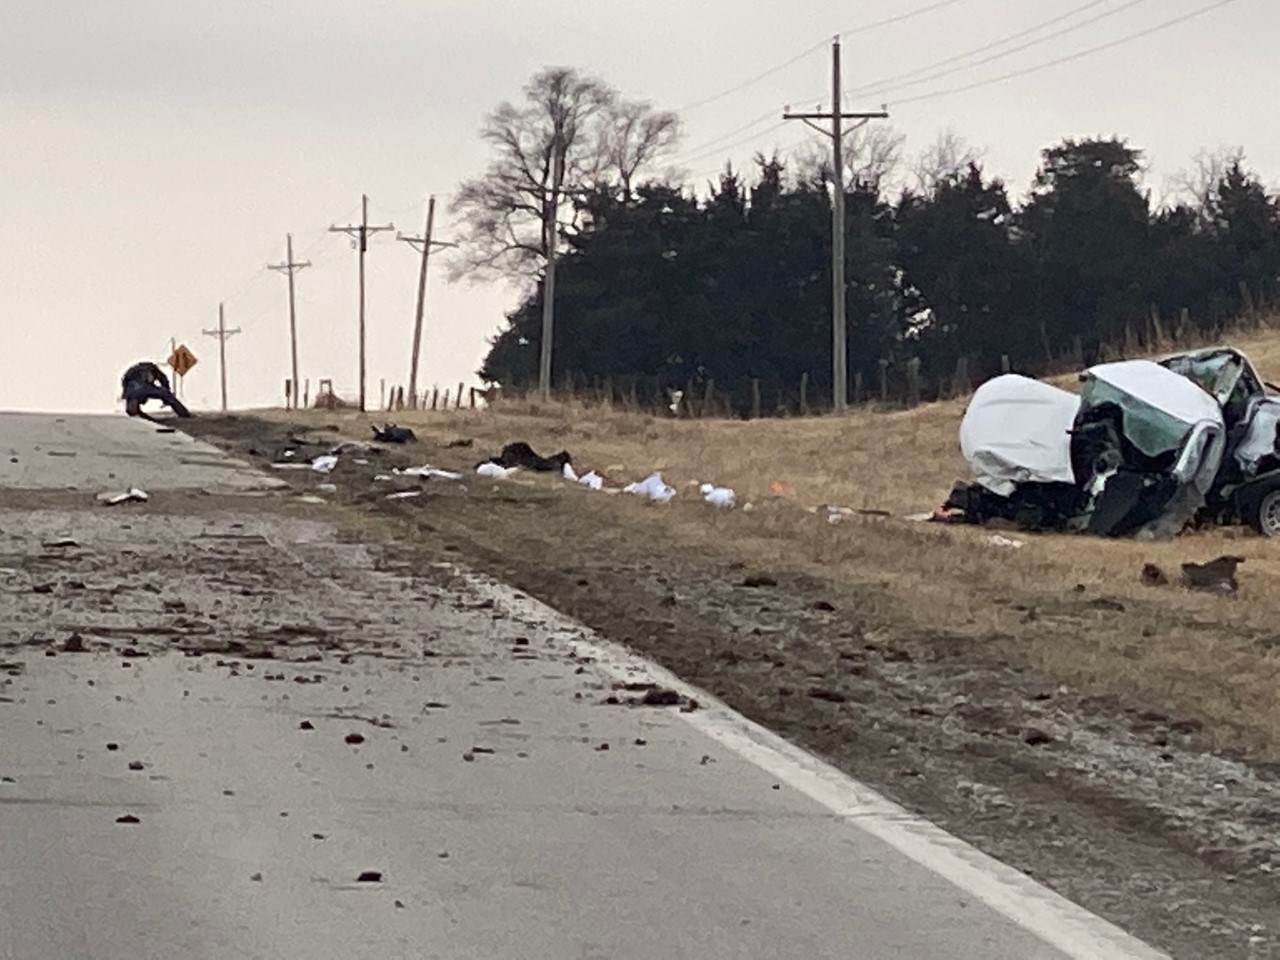 Fatality Accident on Highway 75 At Nemaha and Richardson County